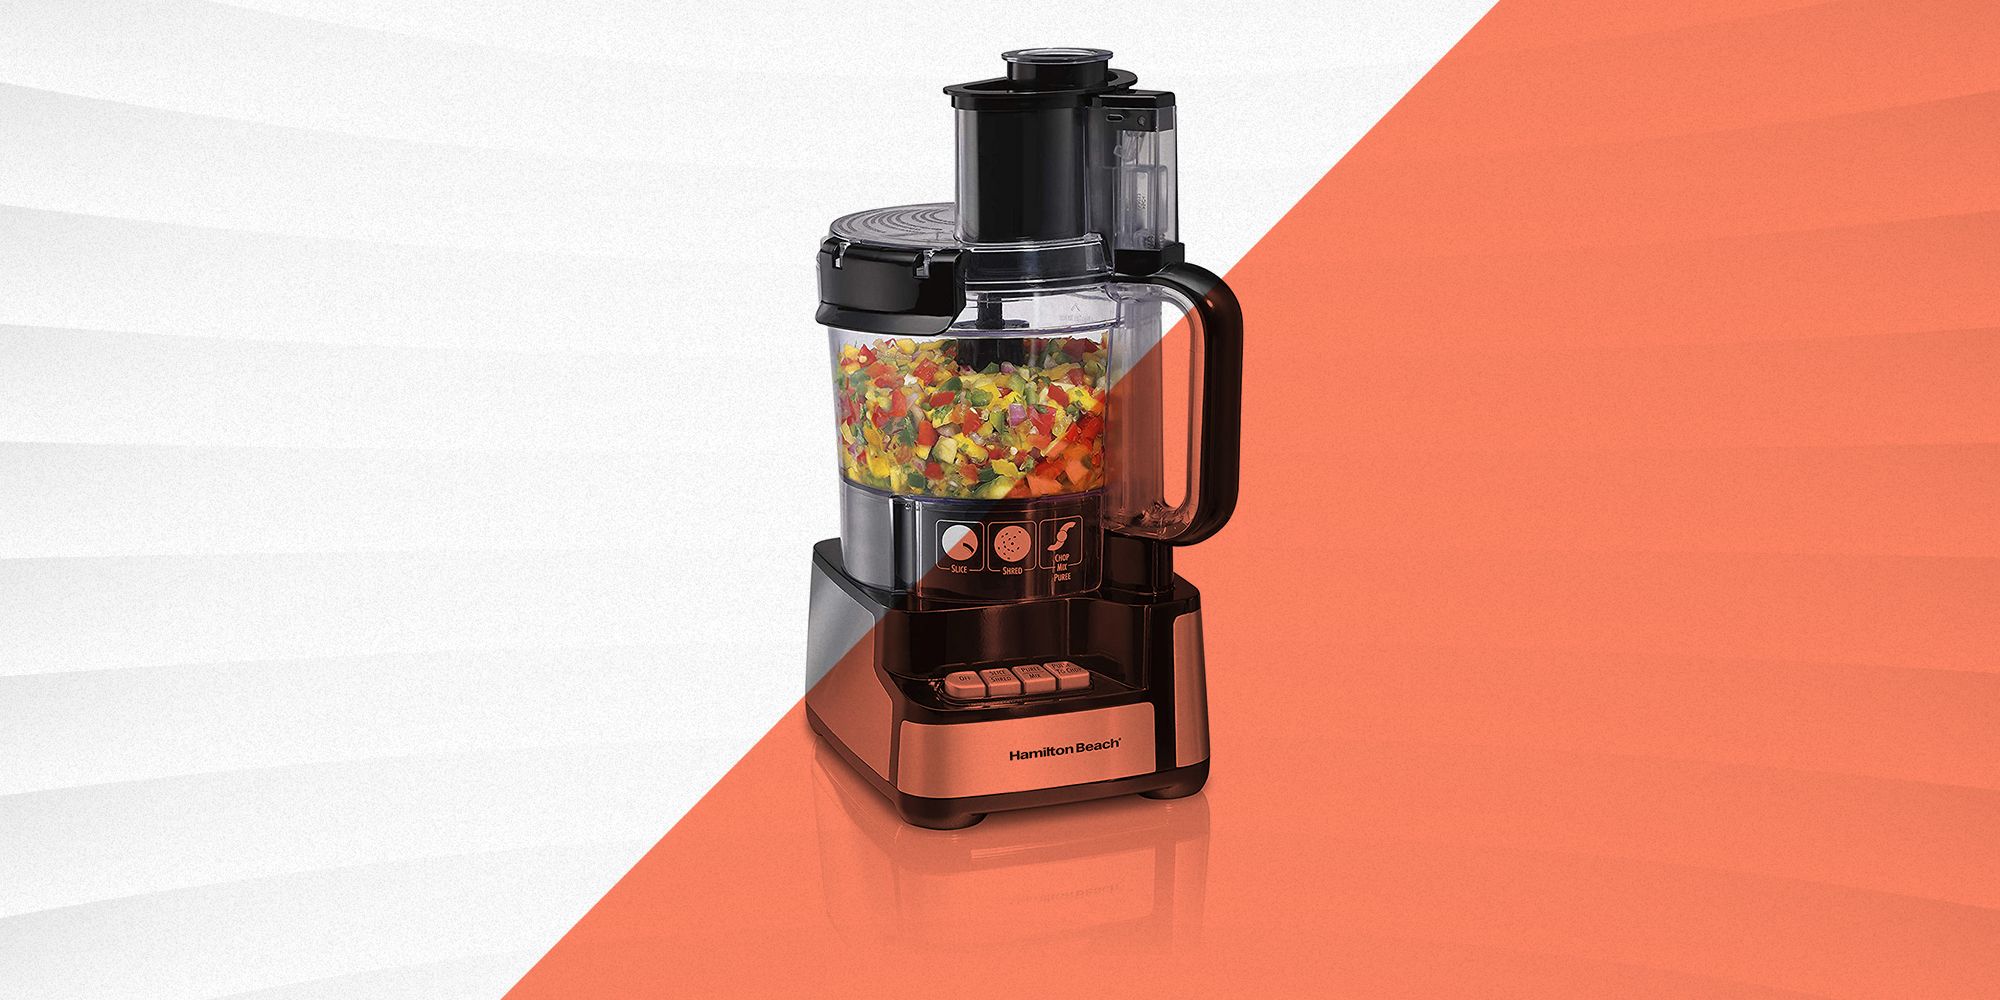 KitchenAid 9-Cup Food Processor review: great for families